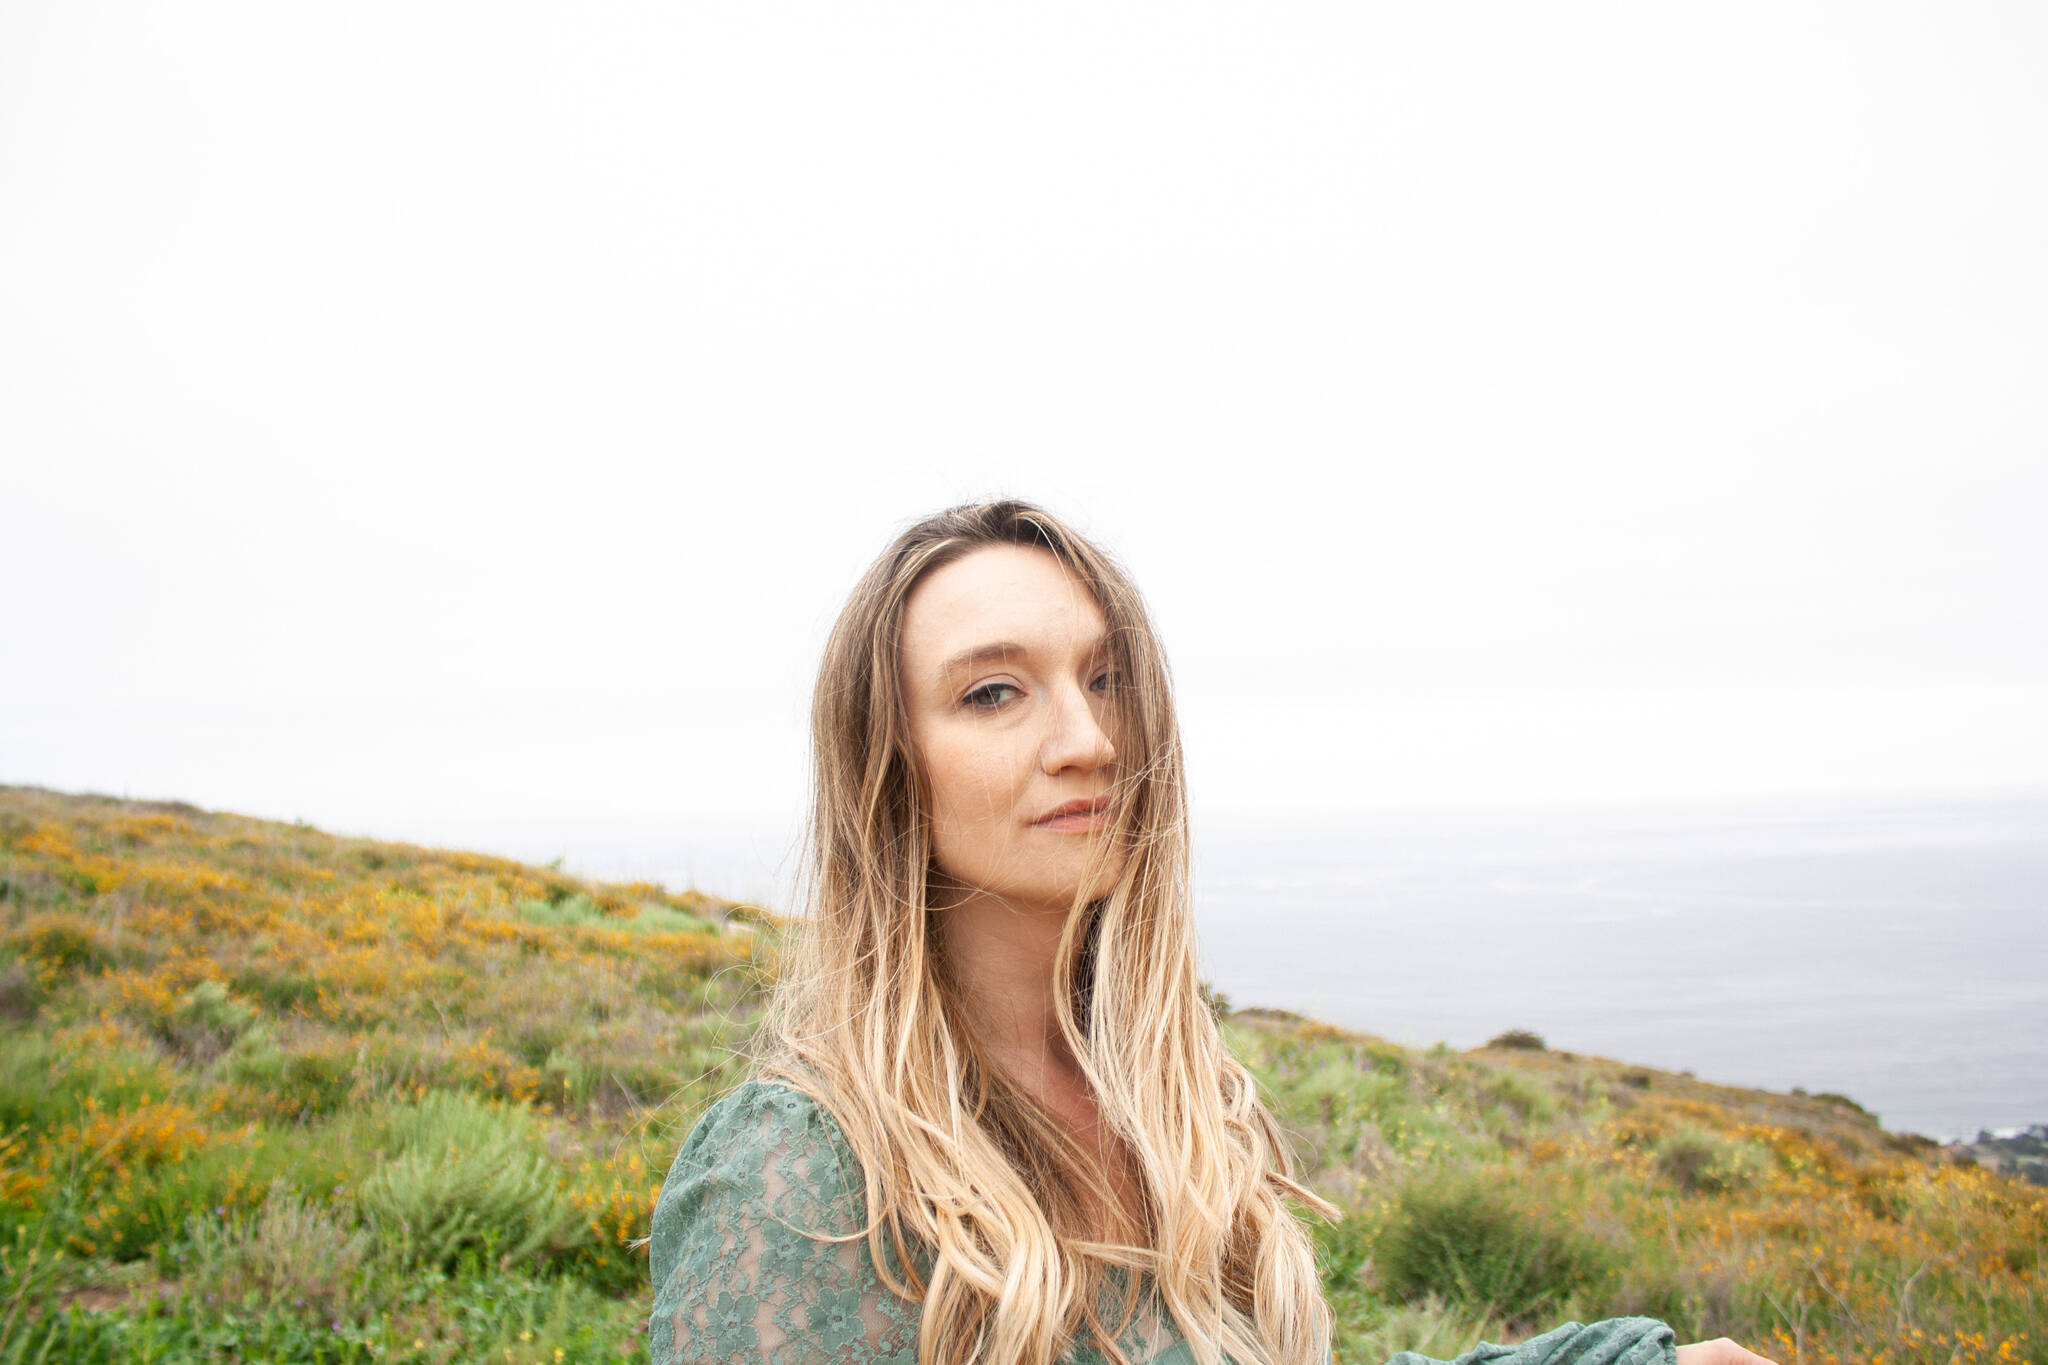 Courtesy Photo / Chris West
Emily Anderson’s second album “Salt & Water” will be released on Friday, May 27. The second album from the L.A.-based singer-songwriter from Fairbanks deals with challenging emotions via some surprisingly sunny tunes.